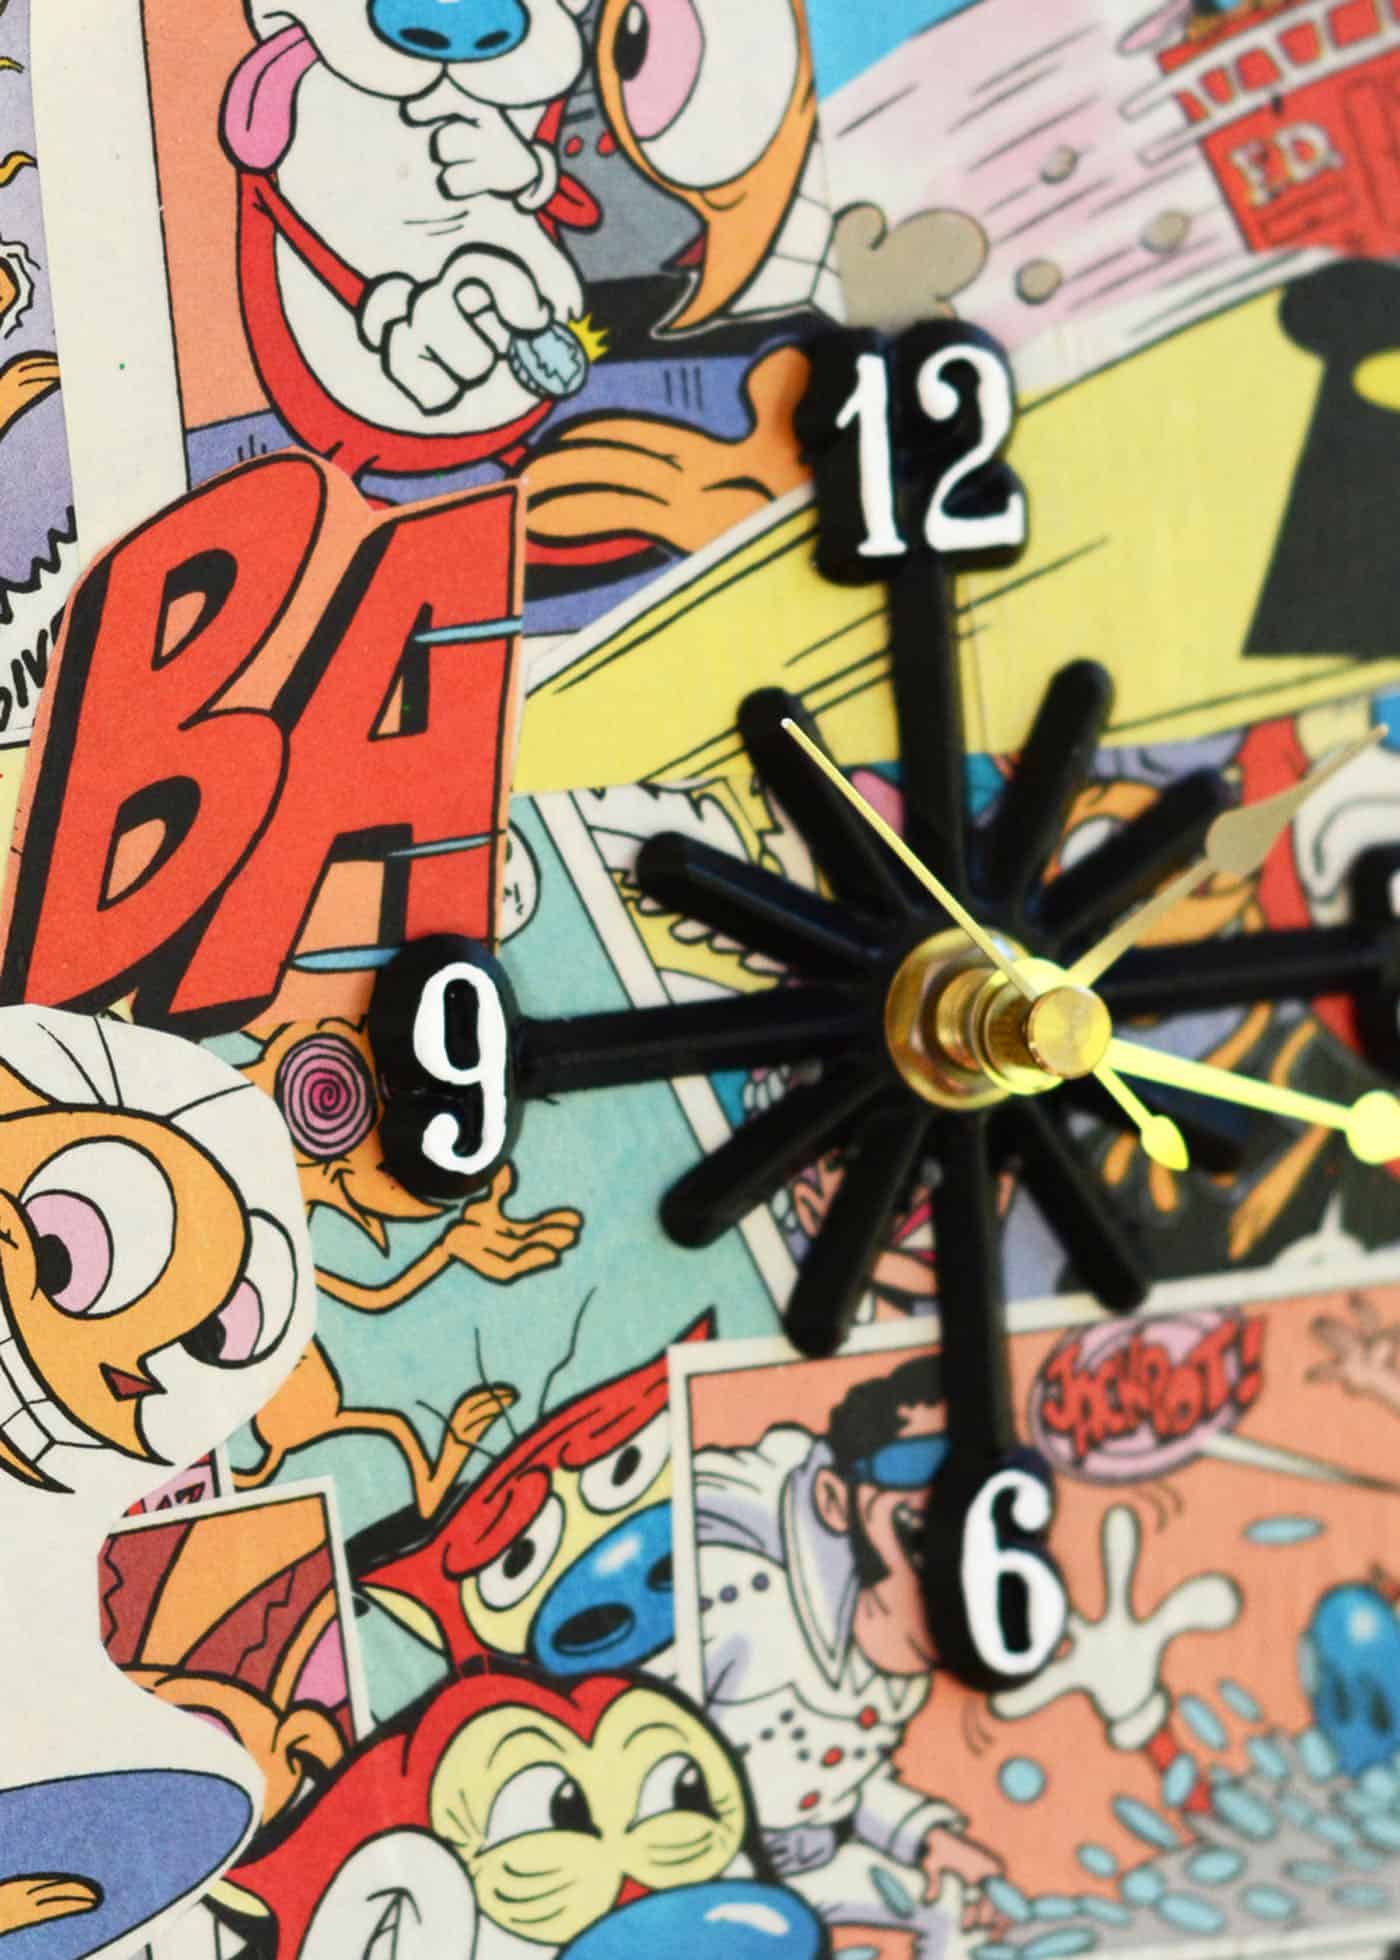 DIY clock made with comic book pages